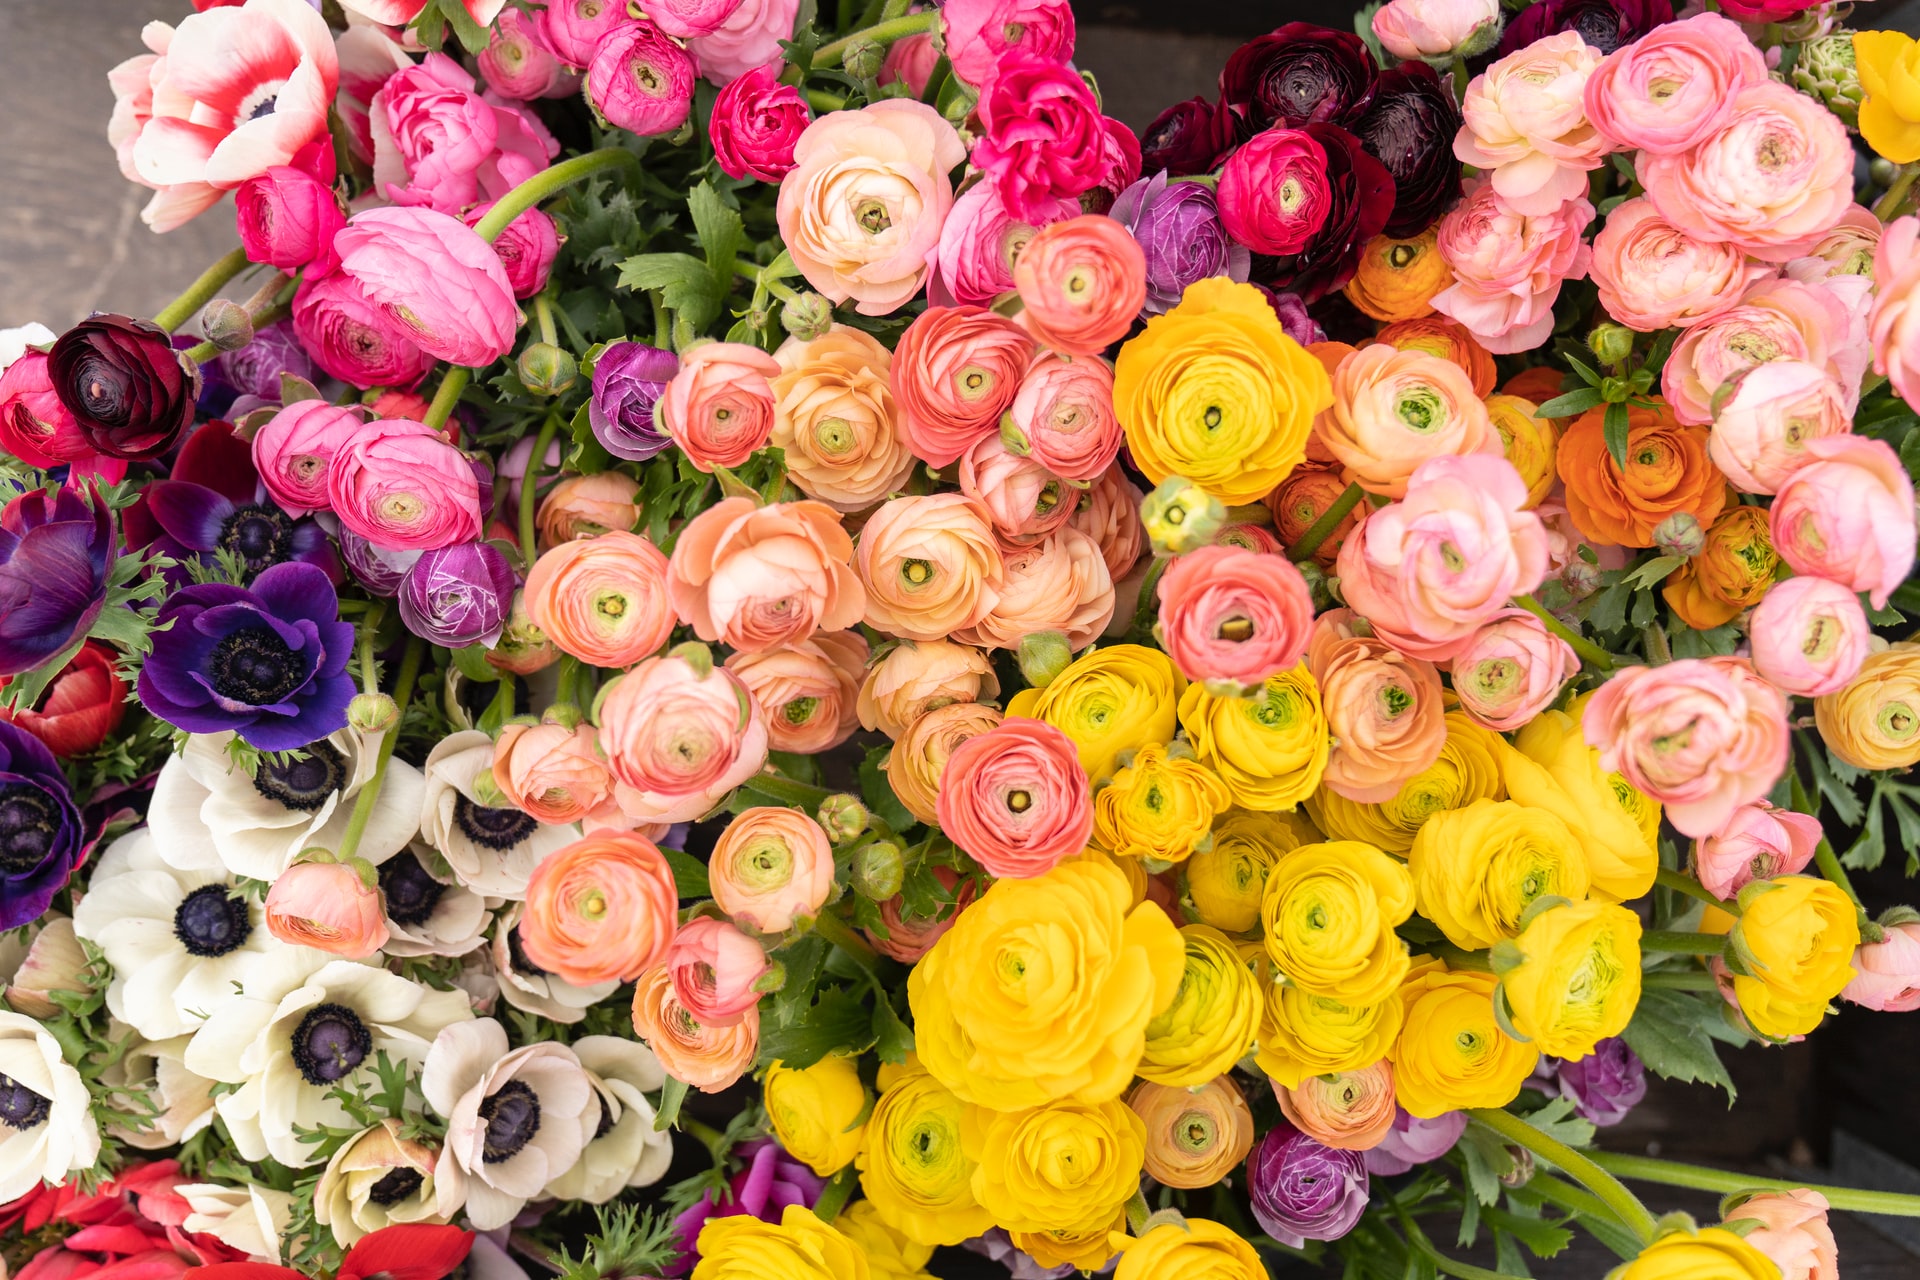 Surprise Mom With Fresh Blooms From House of Flowers